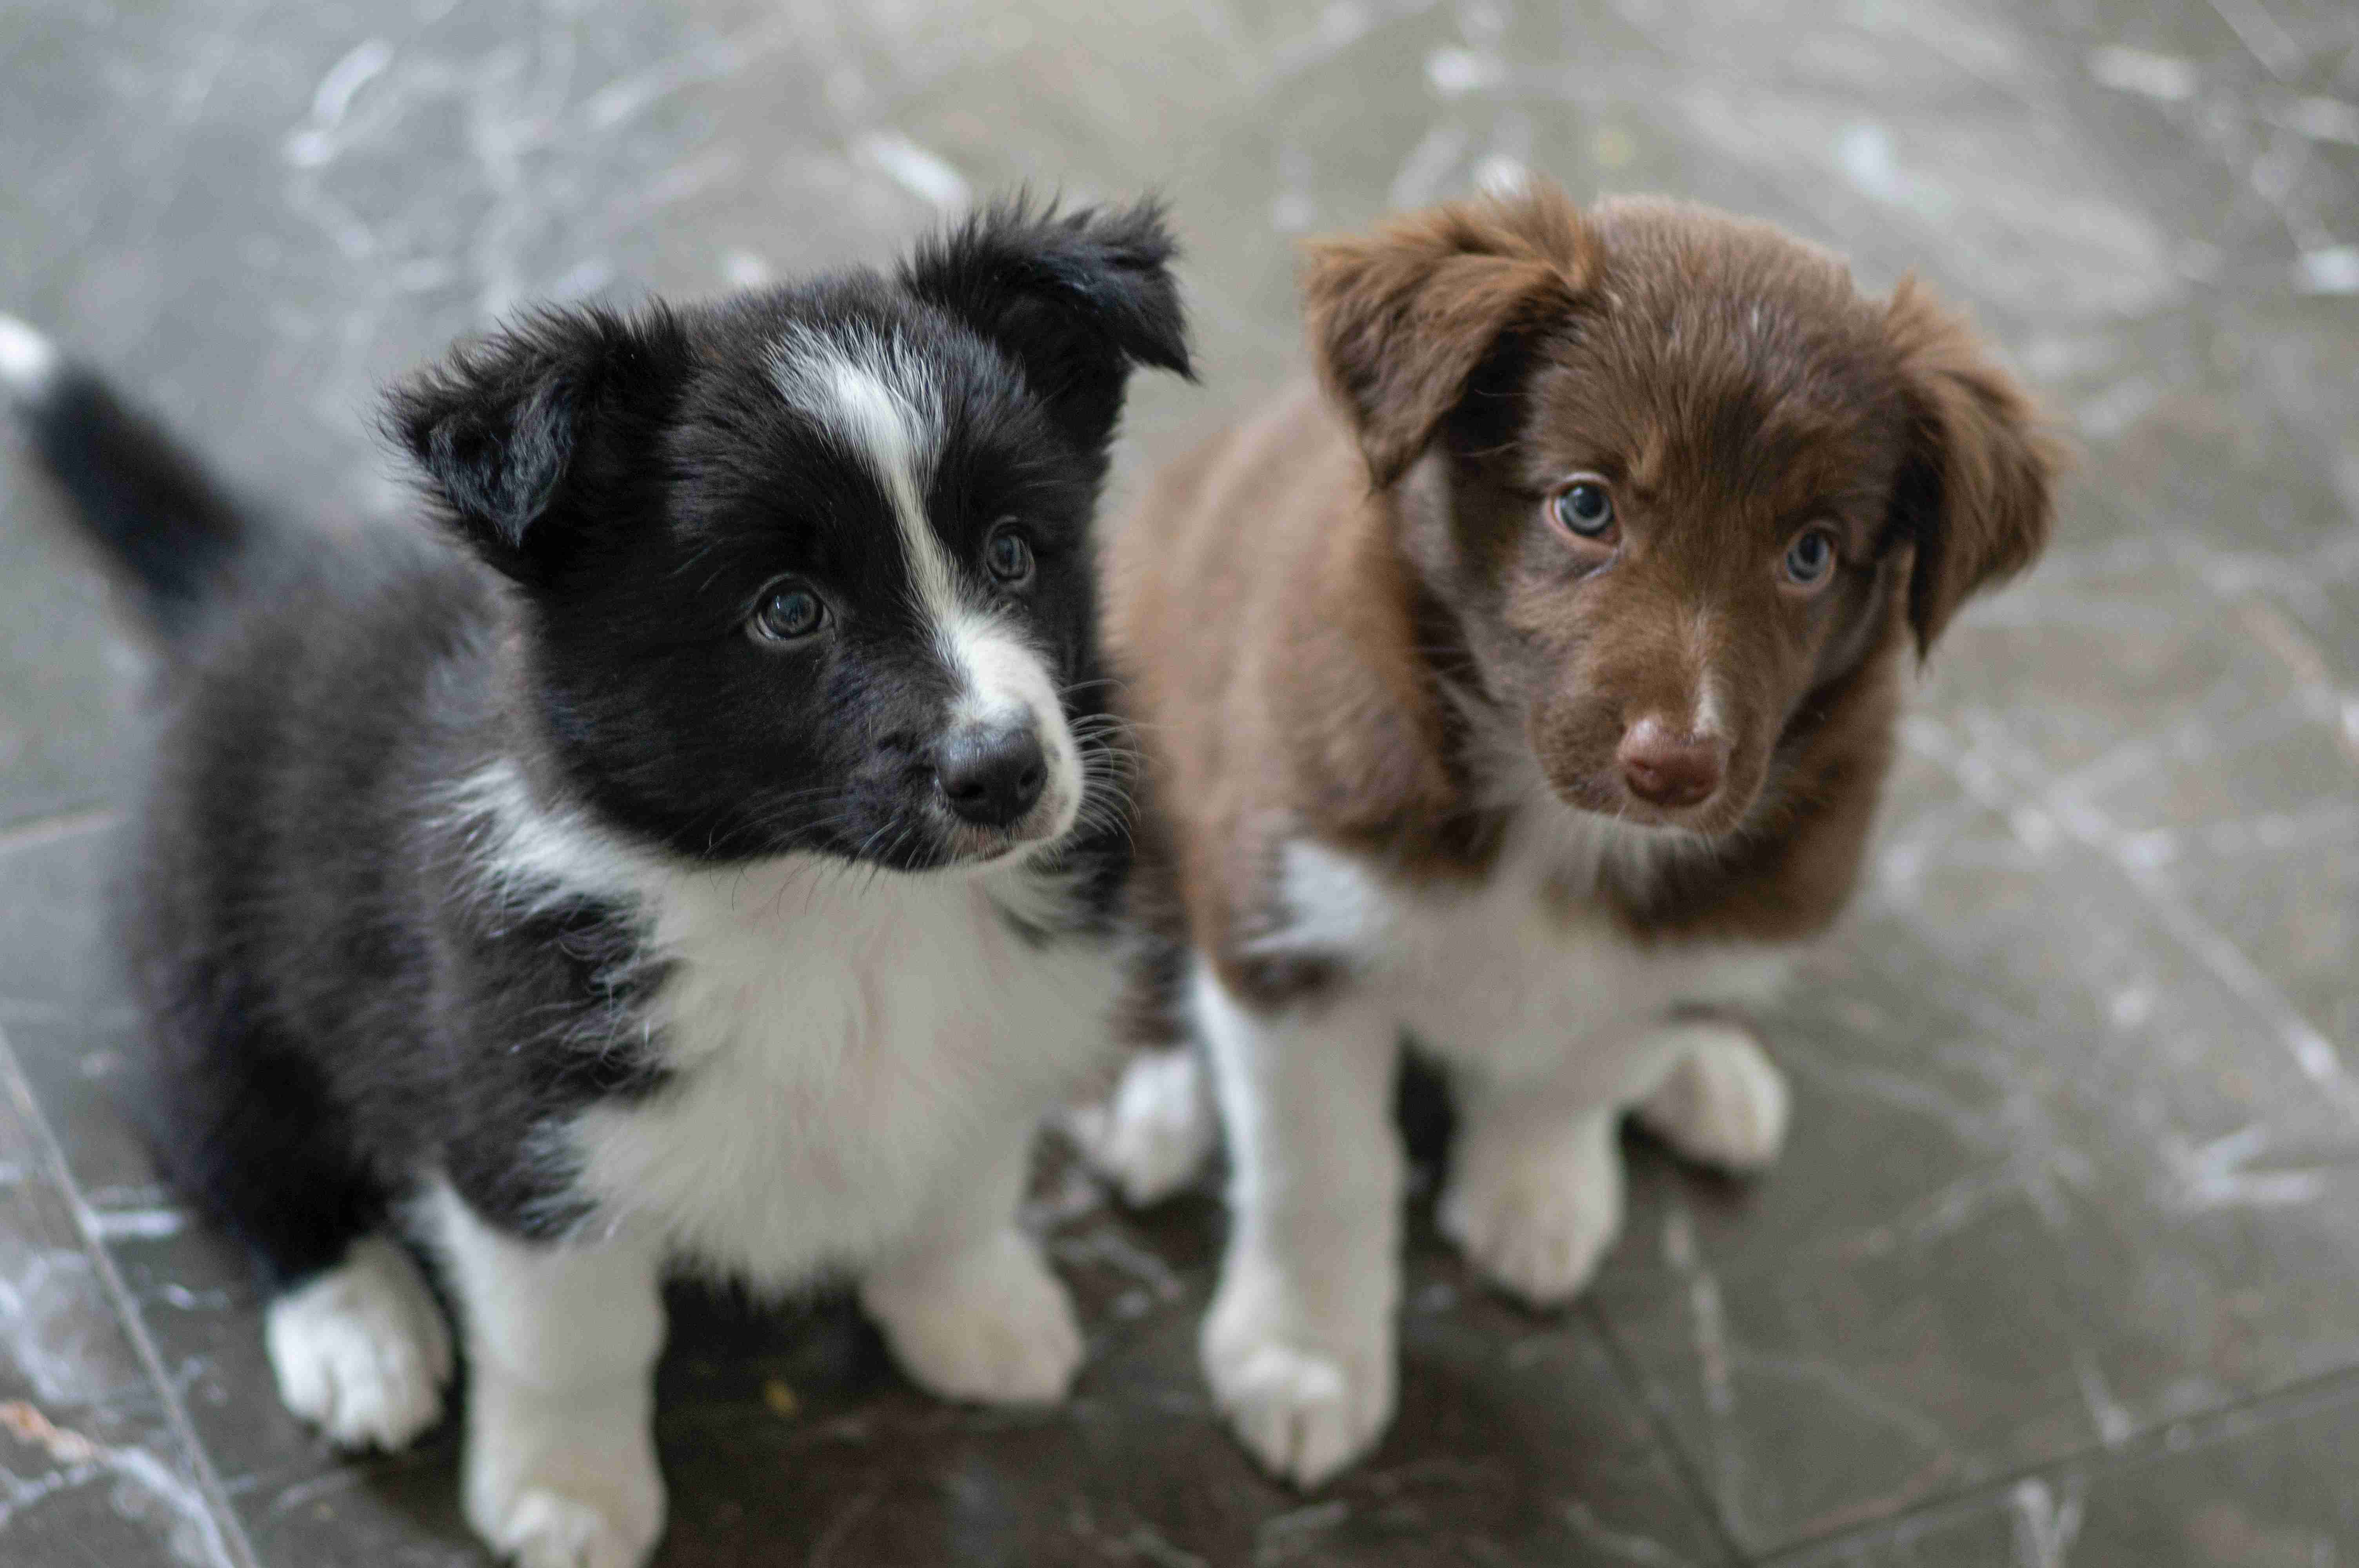 Teaching Your Border Collie Puppy to Speak: A Step-by-Step Guide